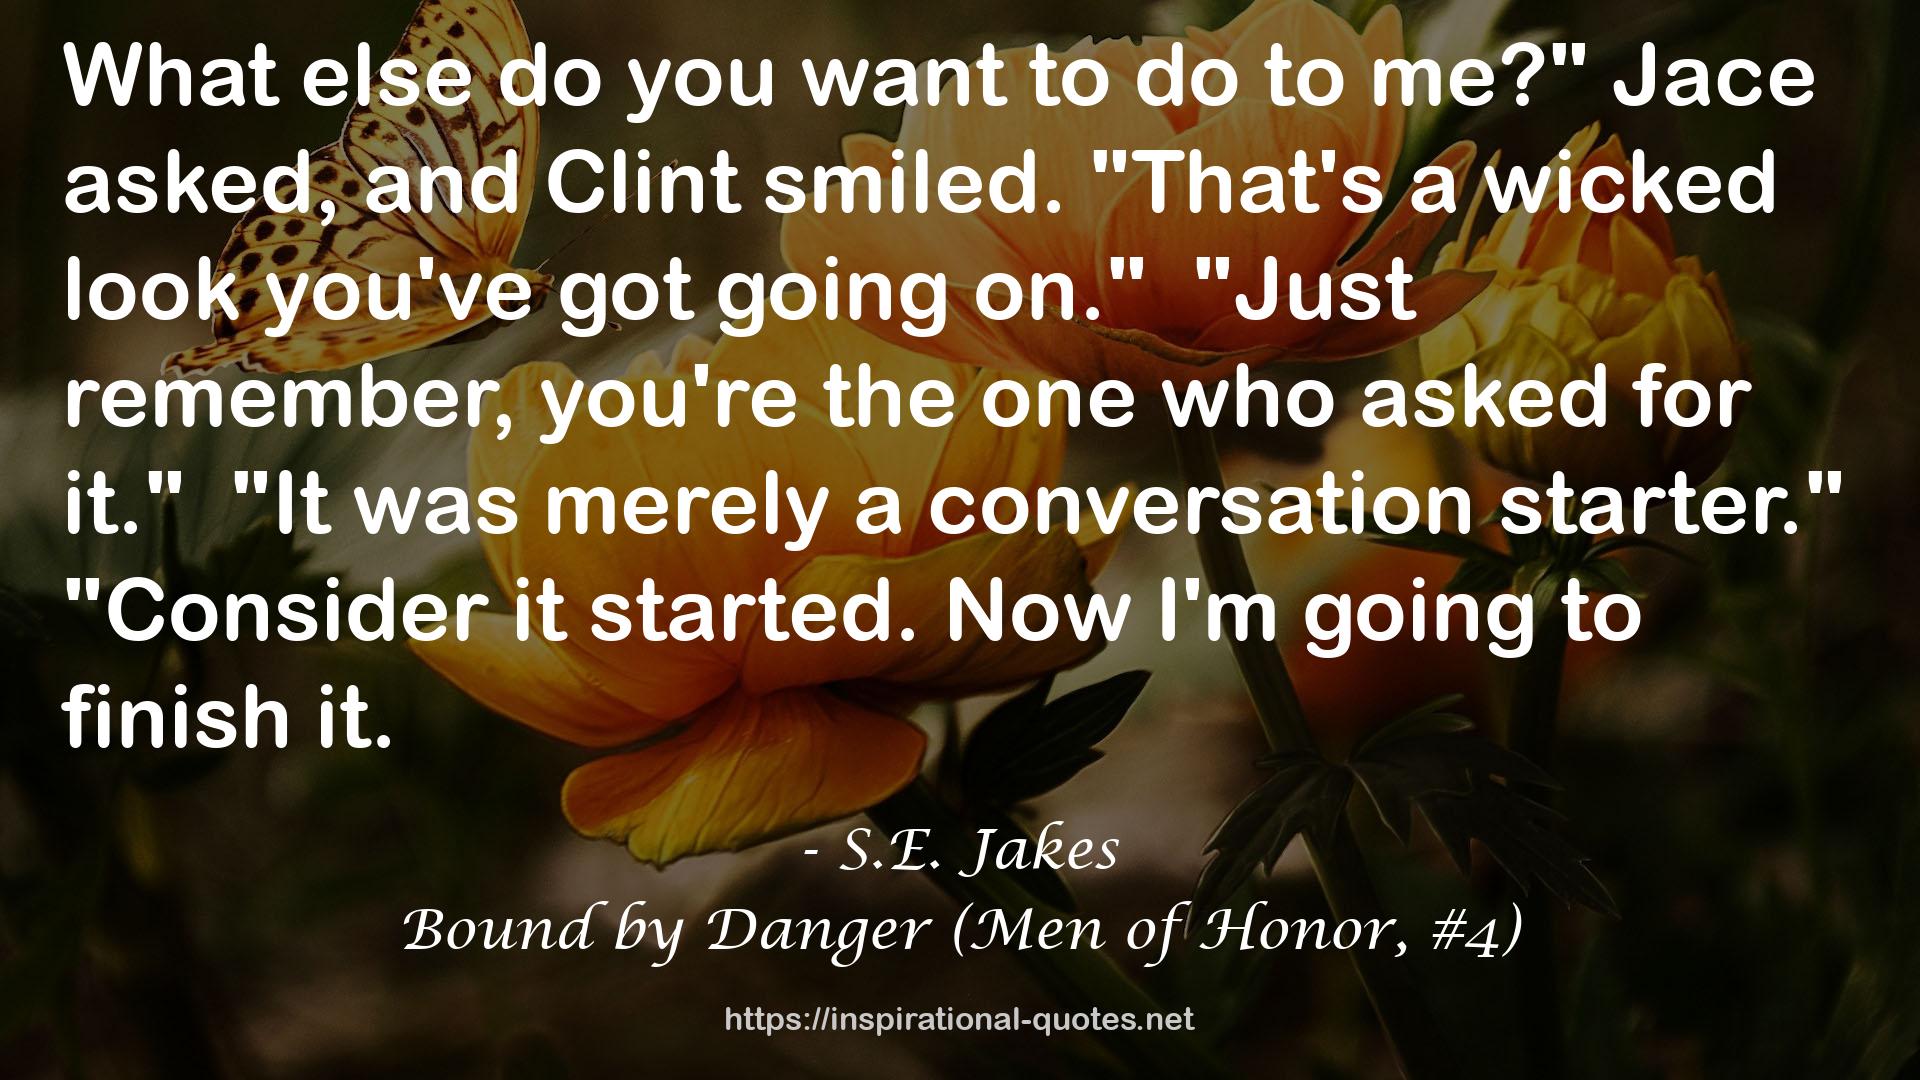 Bound by Danger (Men of Honor, #4) QUOTES